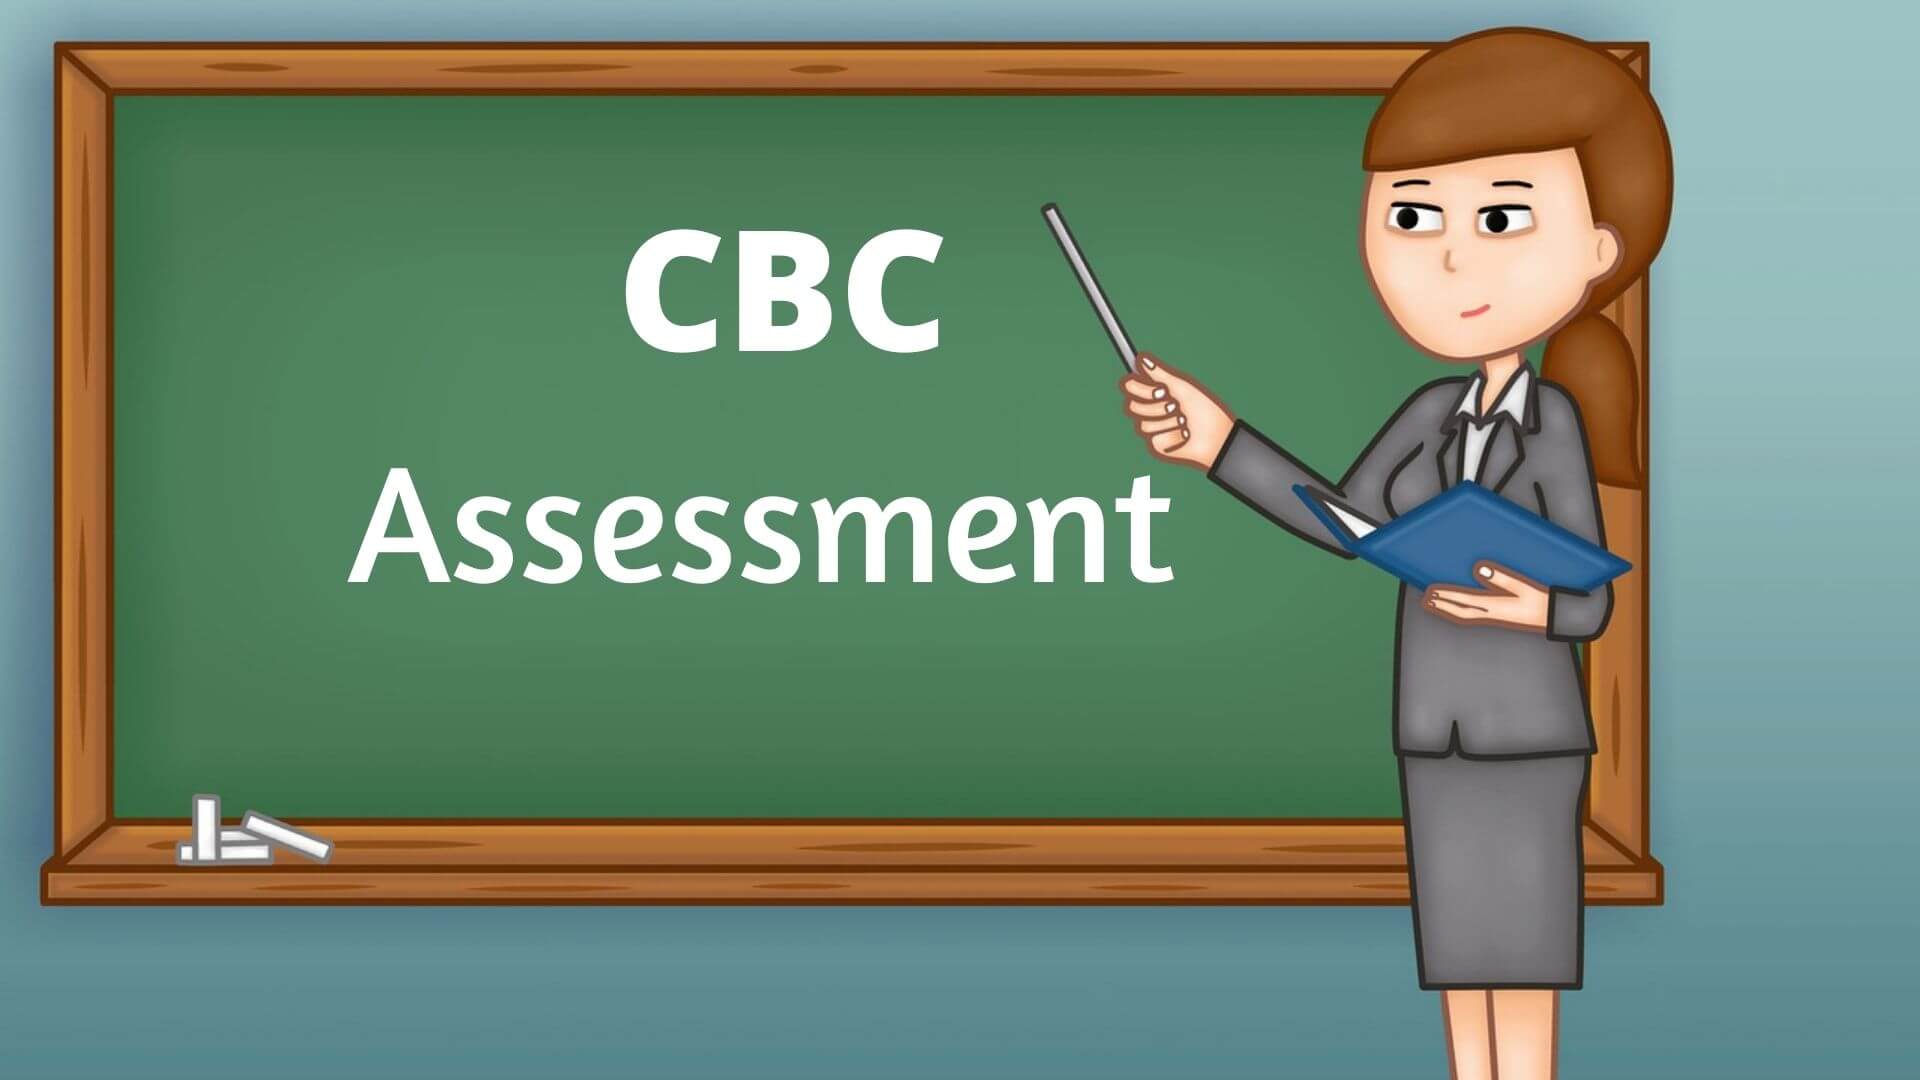 CBC assessment explained in detail